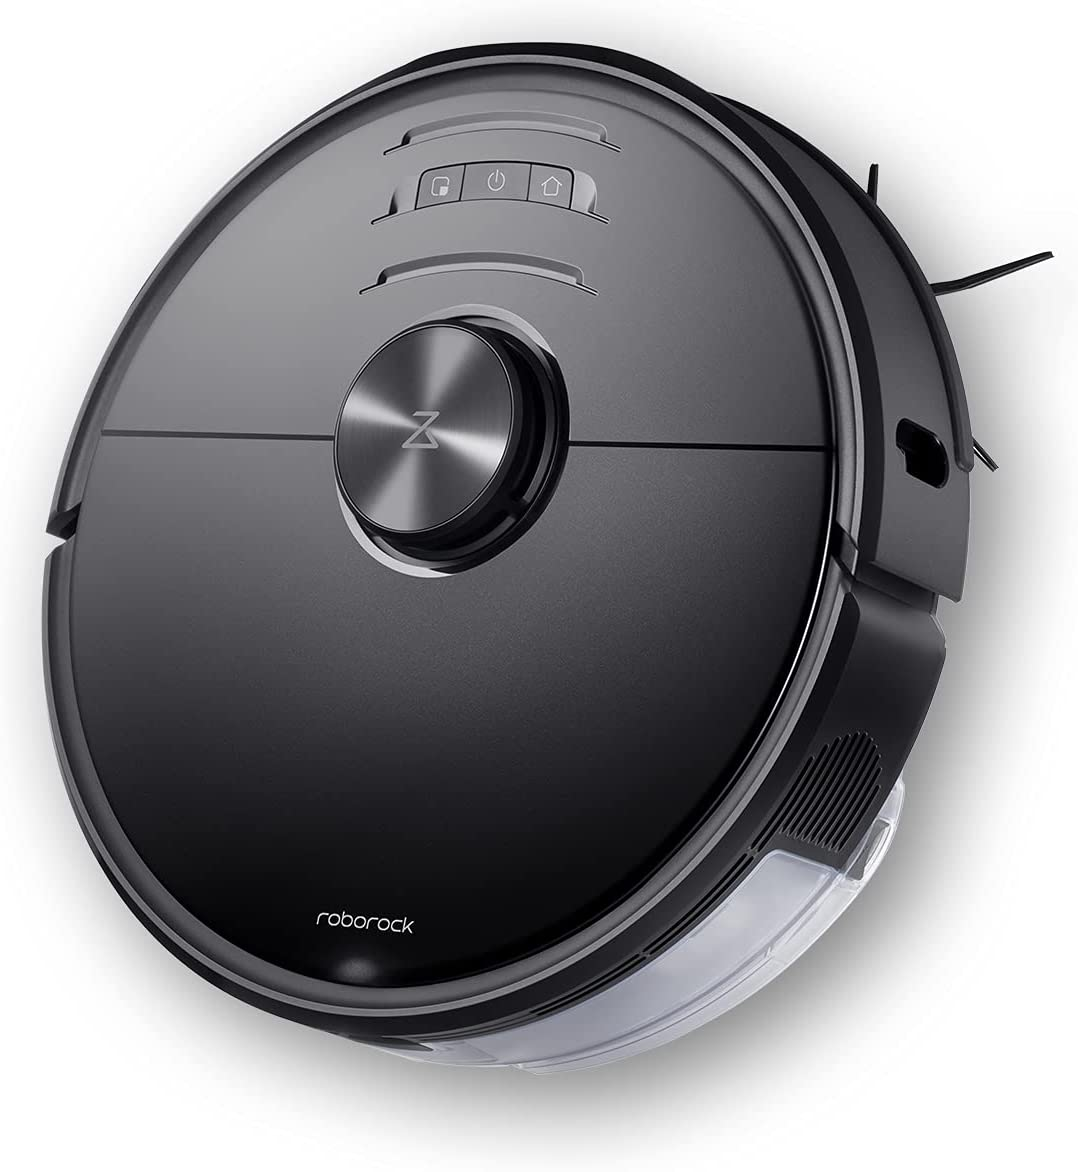 Roborock S6 MaxV Robot Vacuum Cleaner with ReactiveAI and Intelligent Mopping, No-mop Zones, Lidar Navigation, 2500Pa Strong Suction, Multi-Level Mapping, Robotic Vacu $459.00